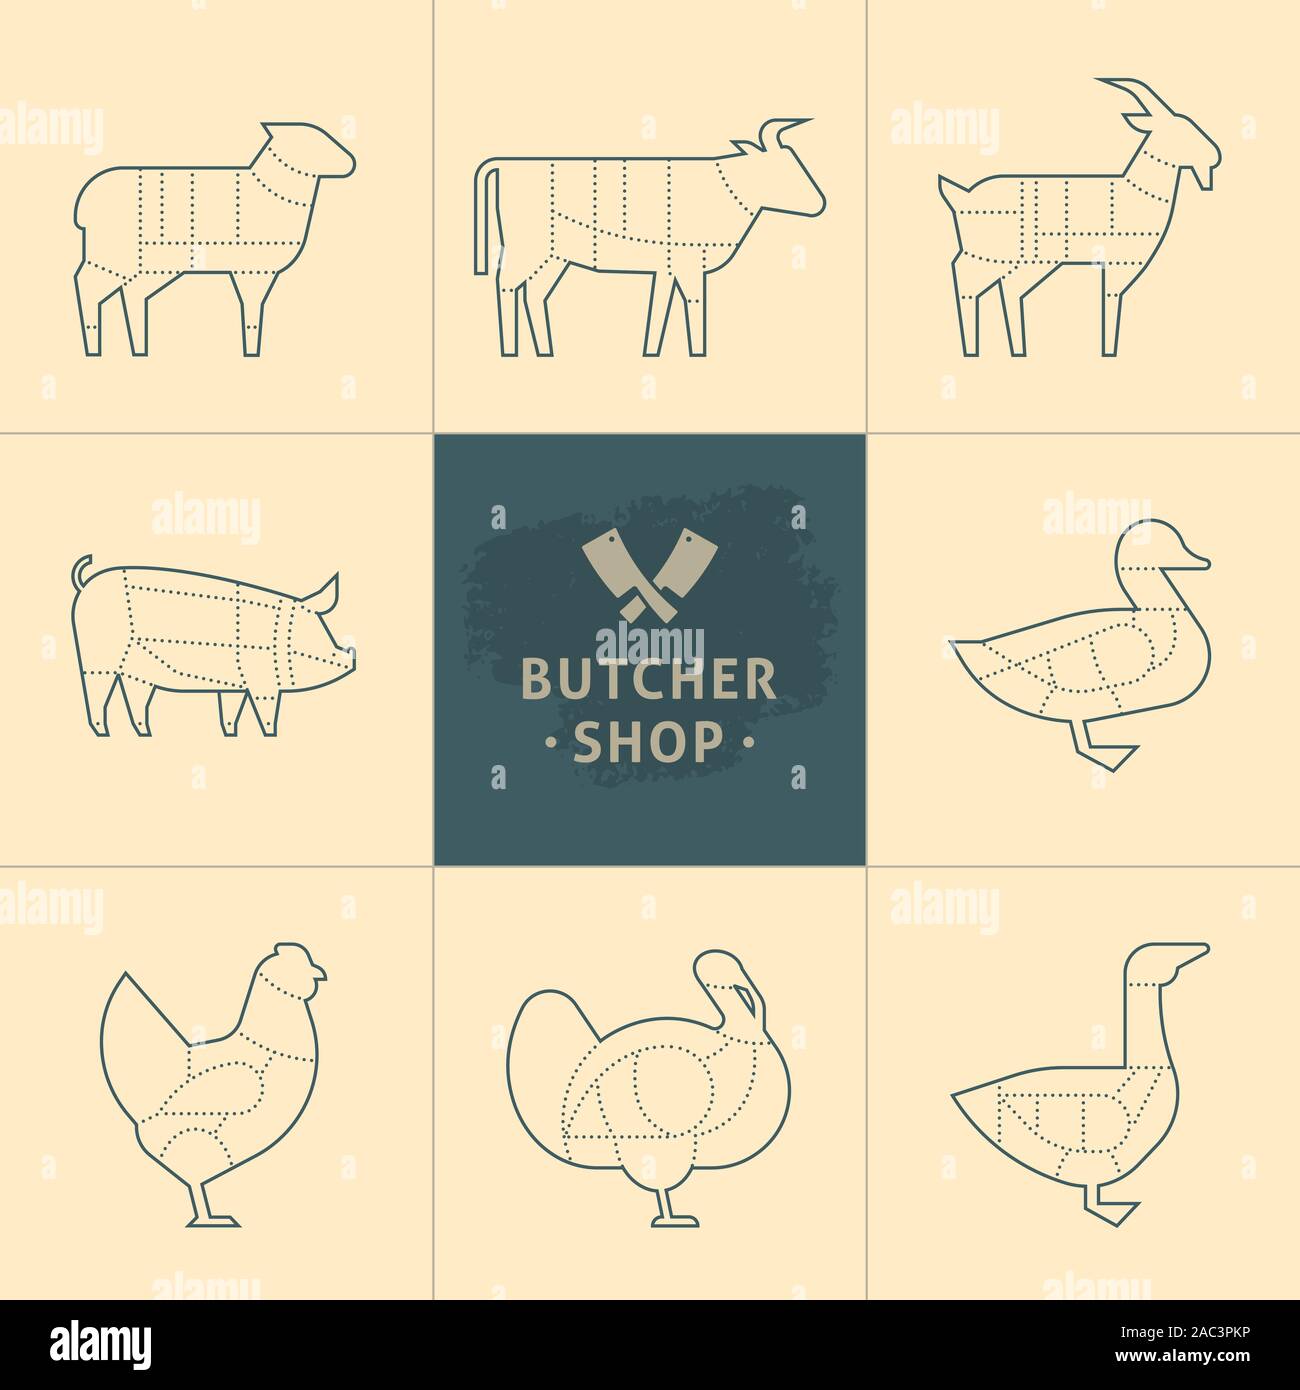 Set a schematic view of animals for the butcher shop. Stock Vector